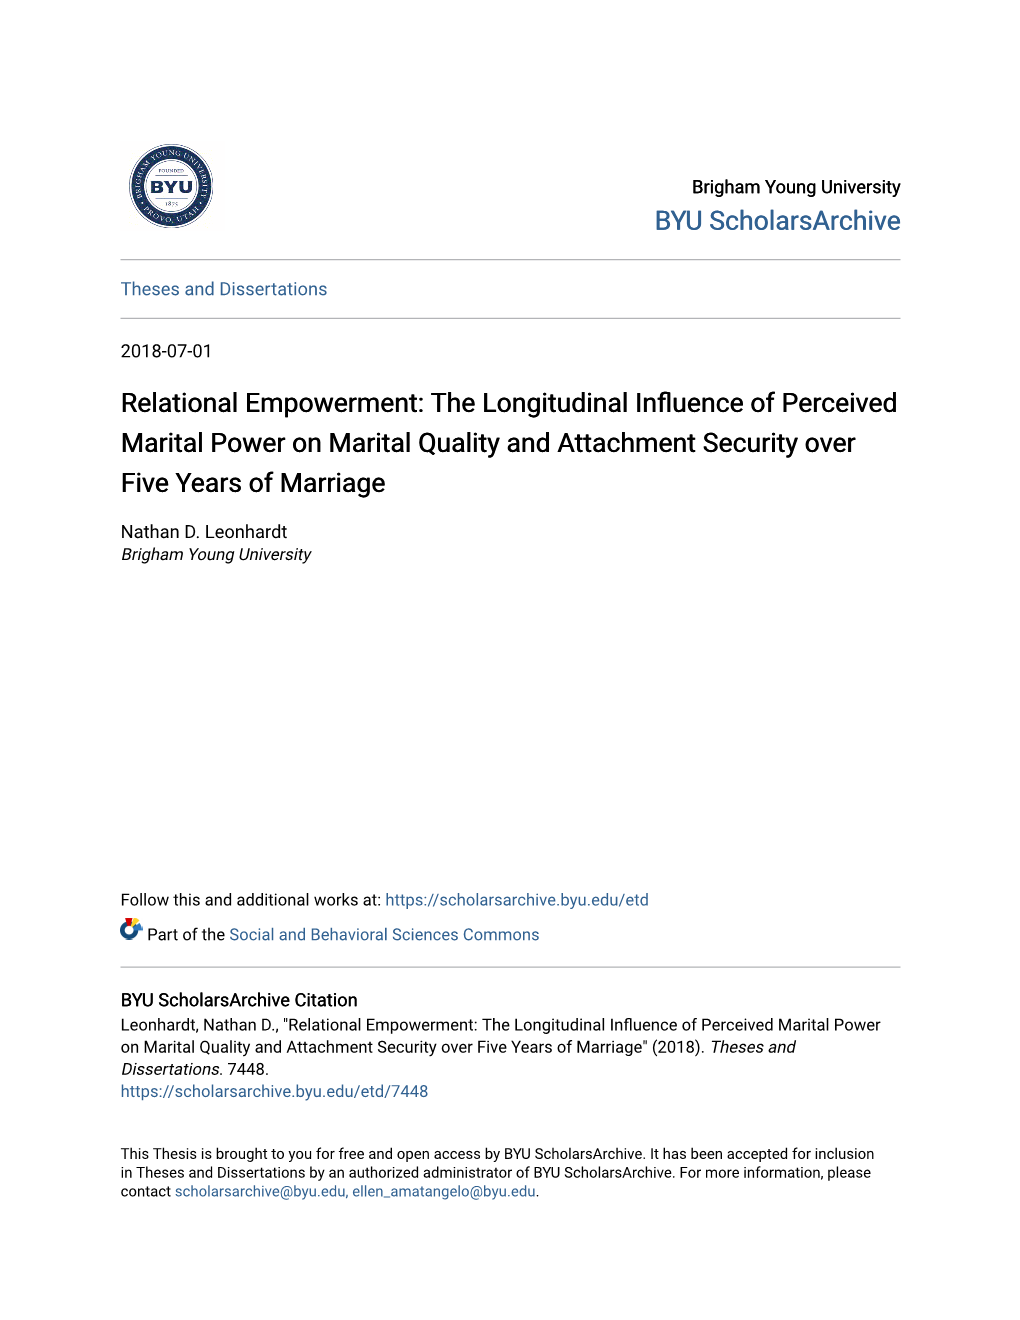 The Longitudinal Influence of Perceived Marital Power on Marital Quality and Attachment Security Over Five Years of Marriage" (2018)